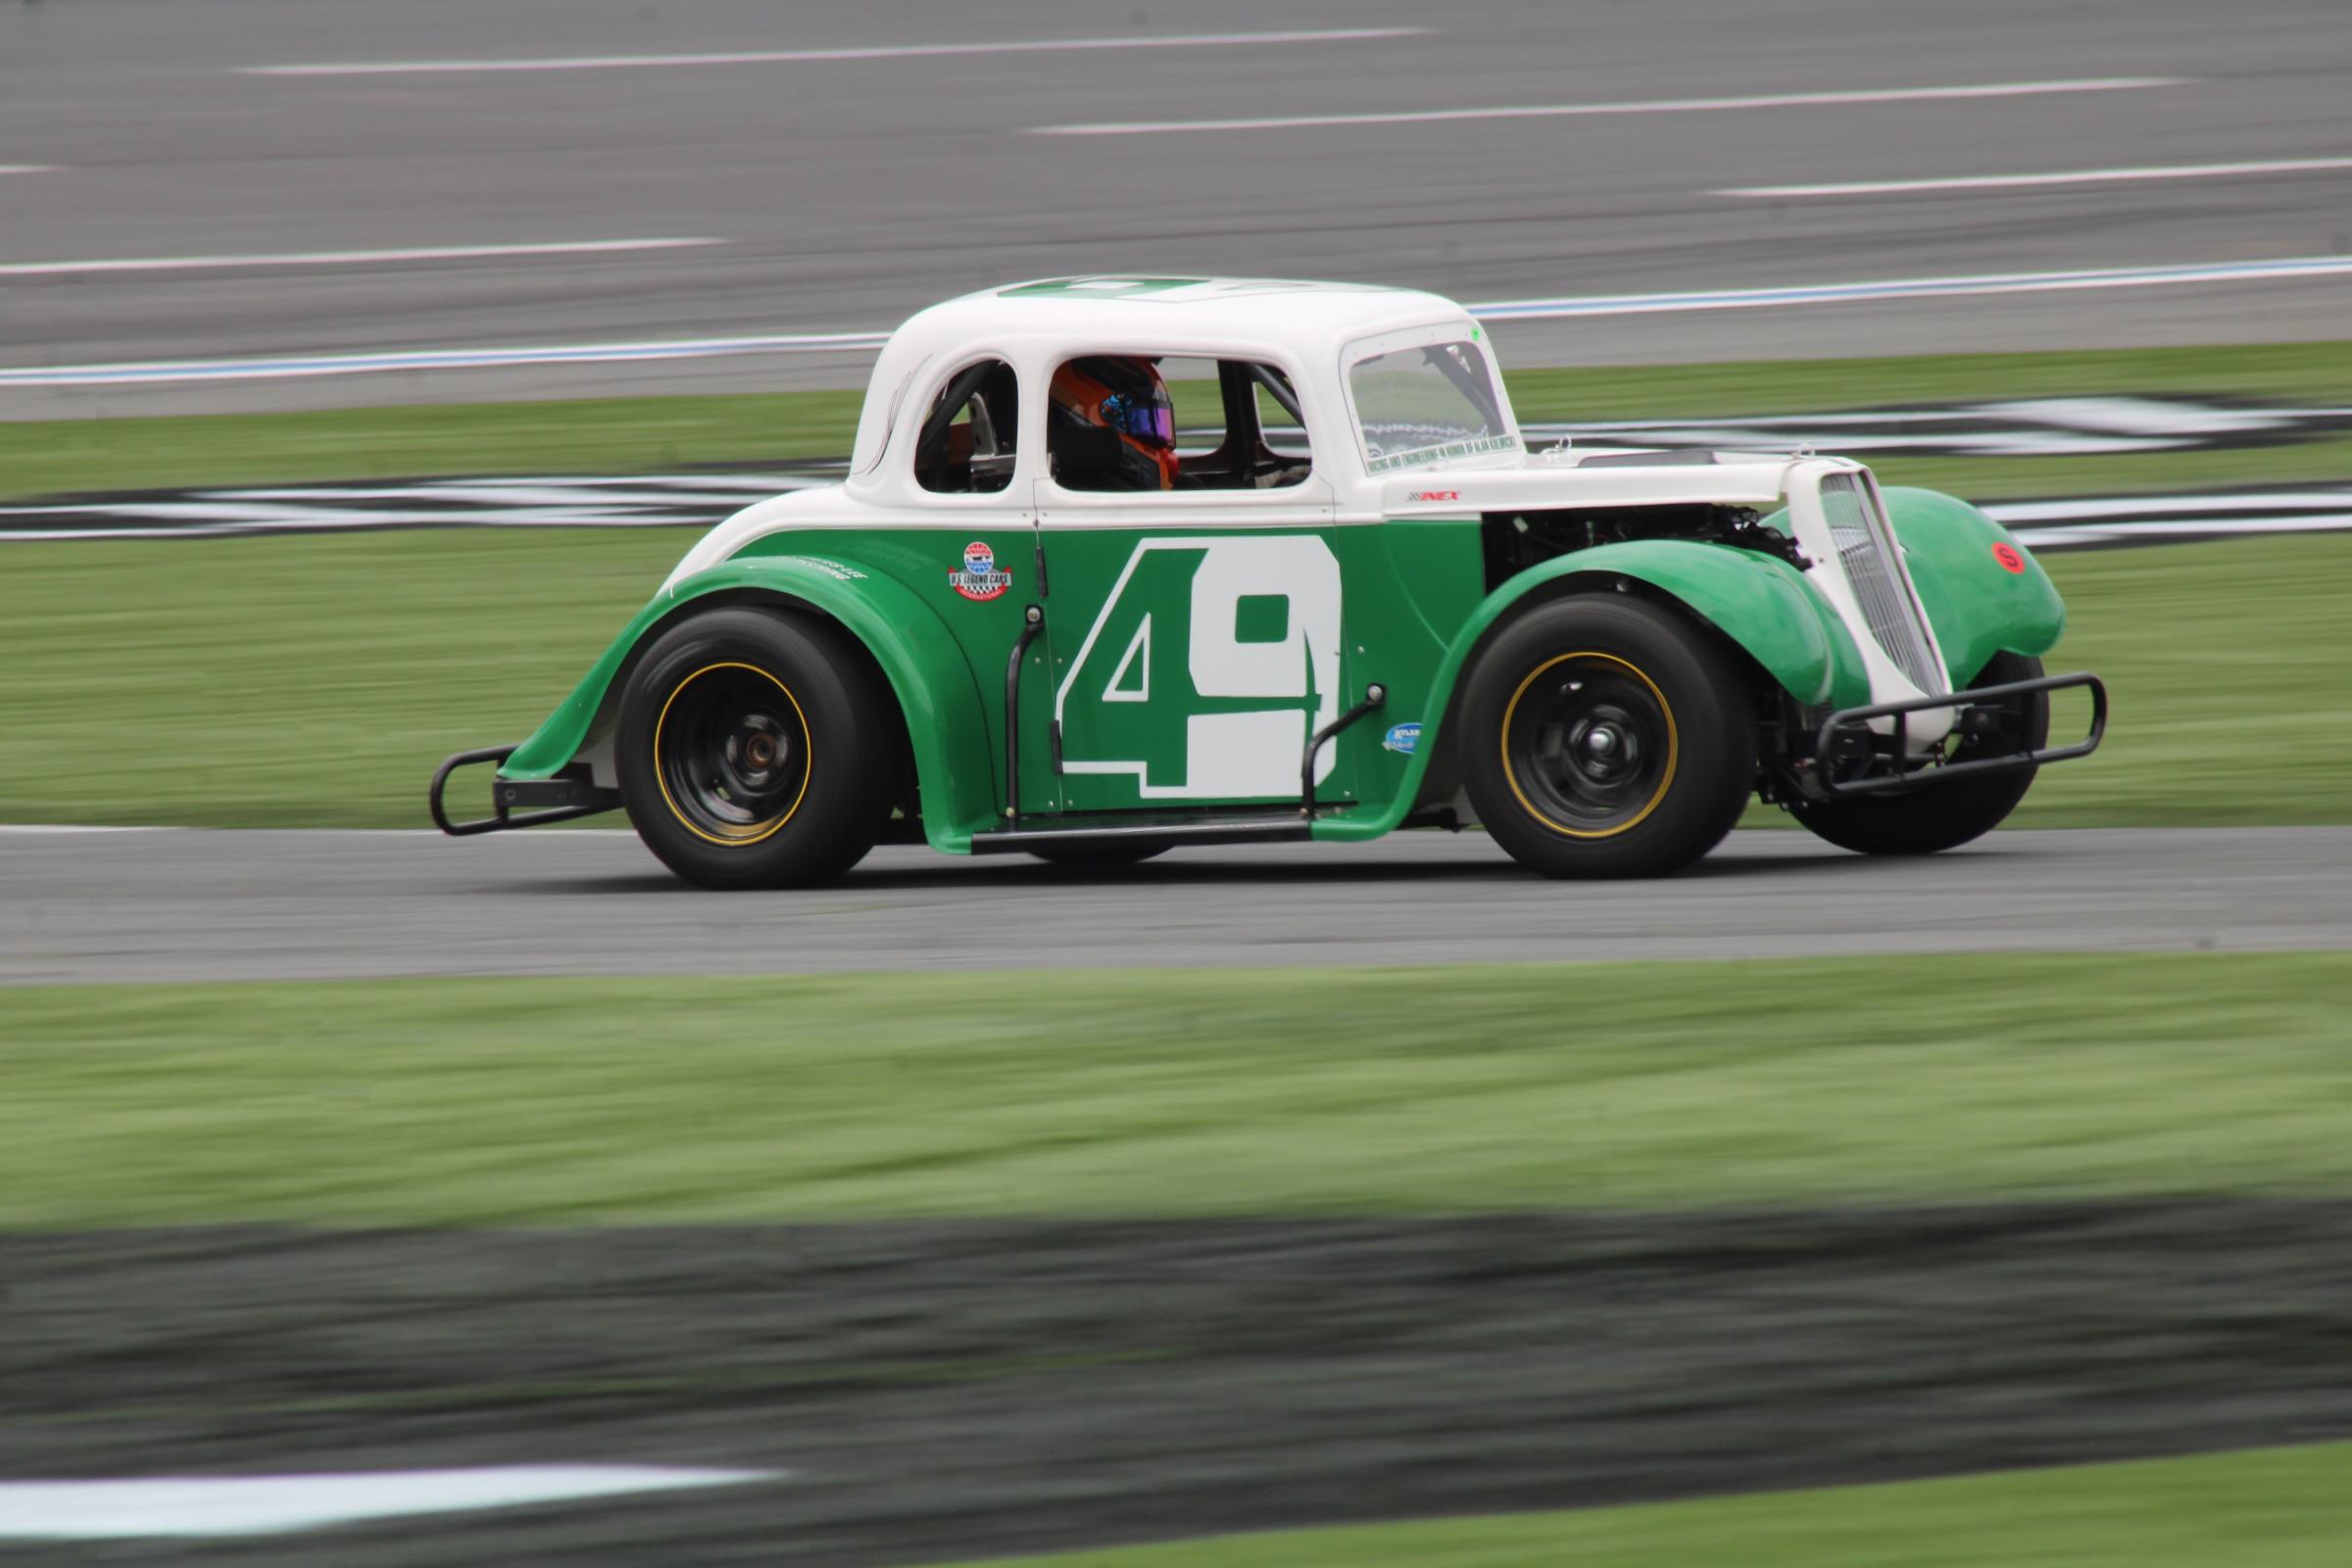 Preview of UNCC 49ers Racing Legend Car by Rocco V Procaccini